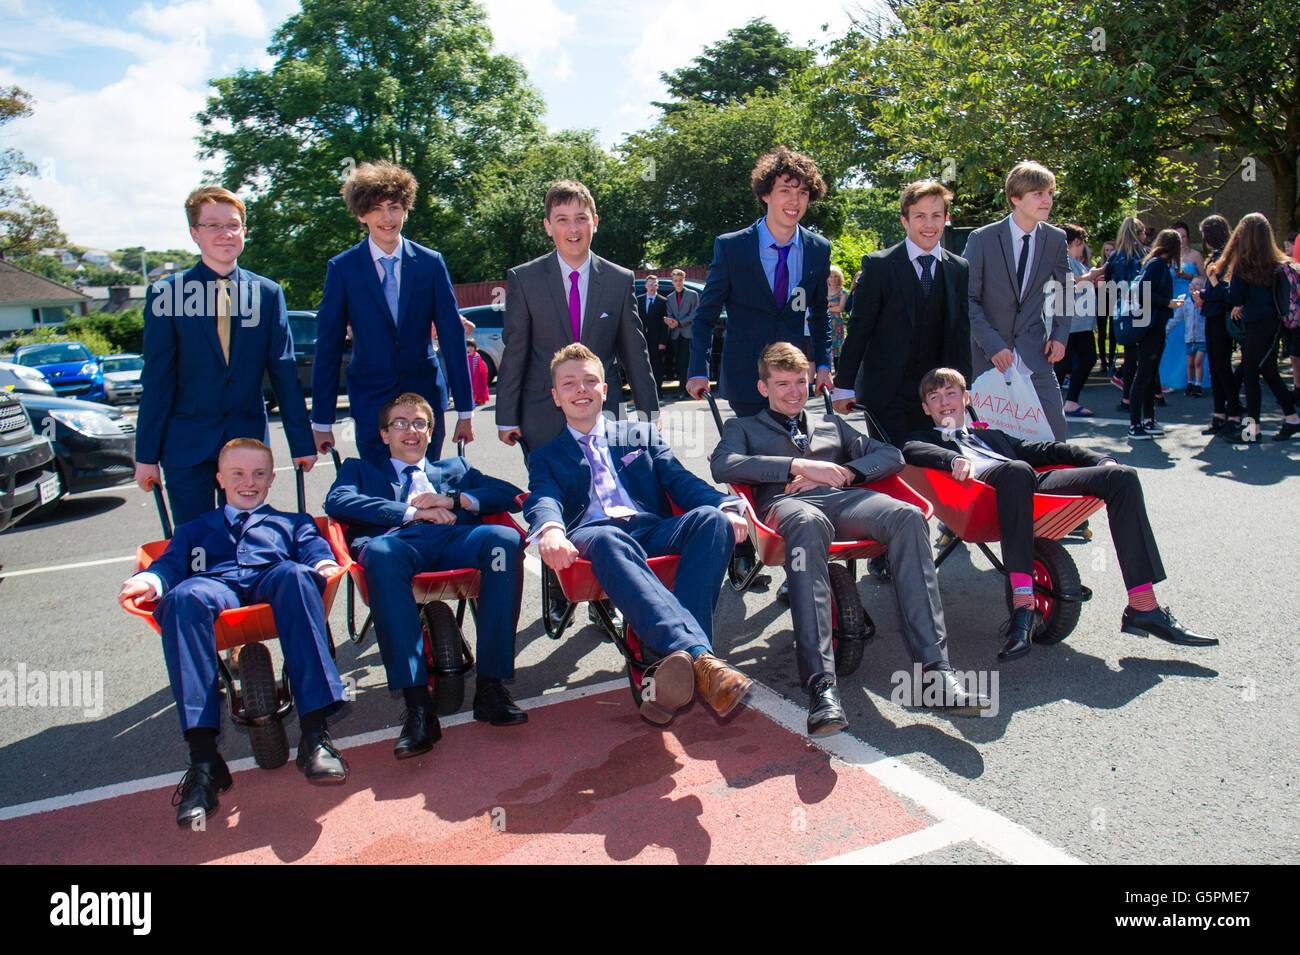 Aberystwyth, Wales, UK. 23rd June, 2016. . Year 11 students at Aberystwyth's Penglais secondary school wearing formal suits arriving in wheelbarrows to  celebrate their 'leavers day' in warm sunshine photo Credit:  keith morris/Alamy Live News Stock Photo